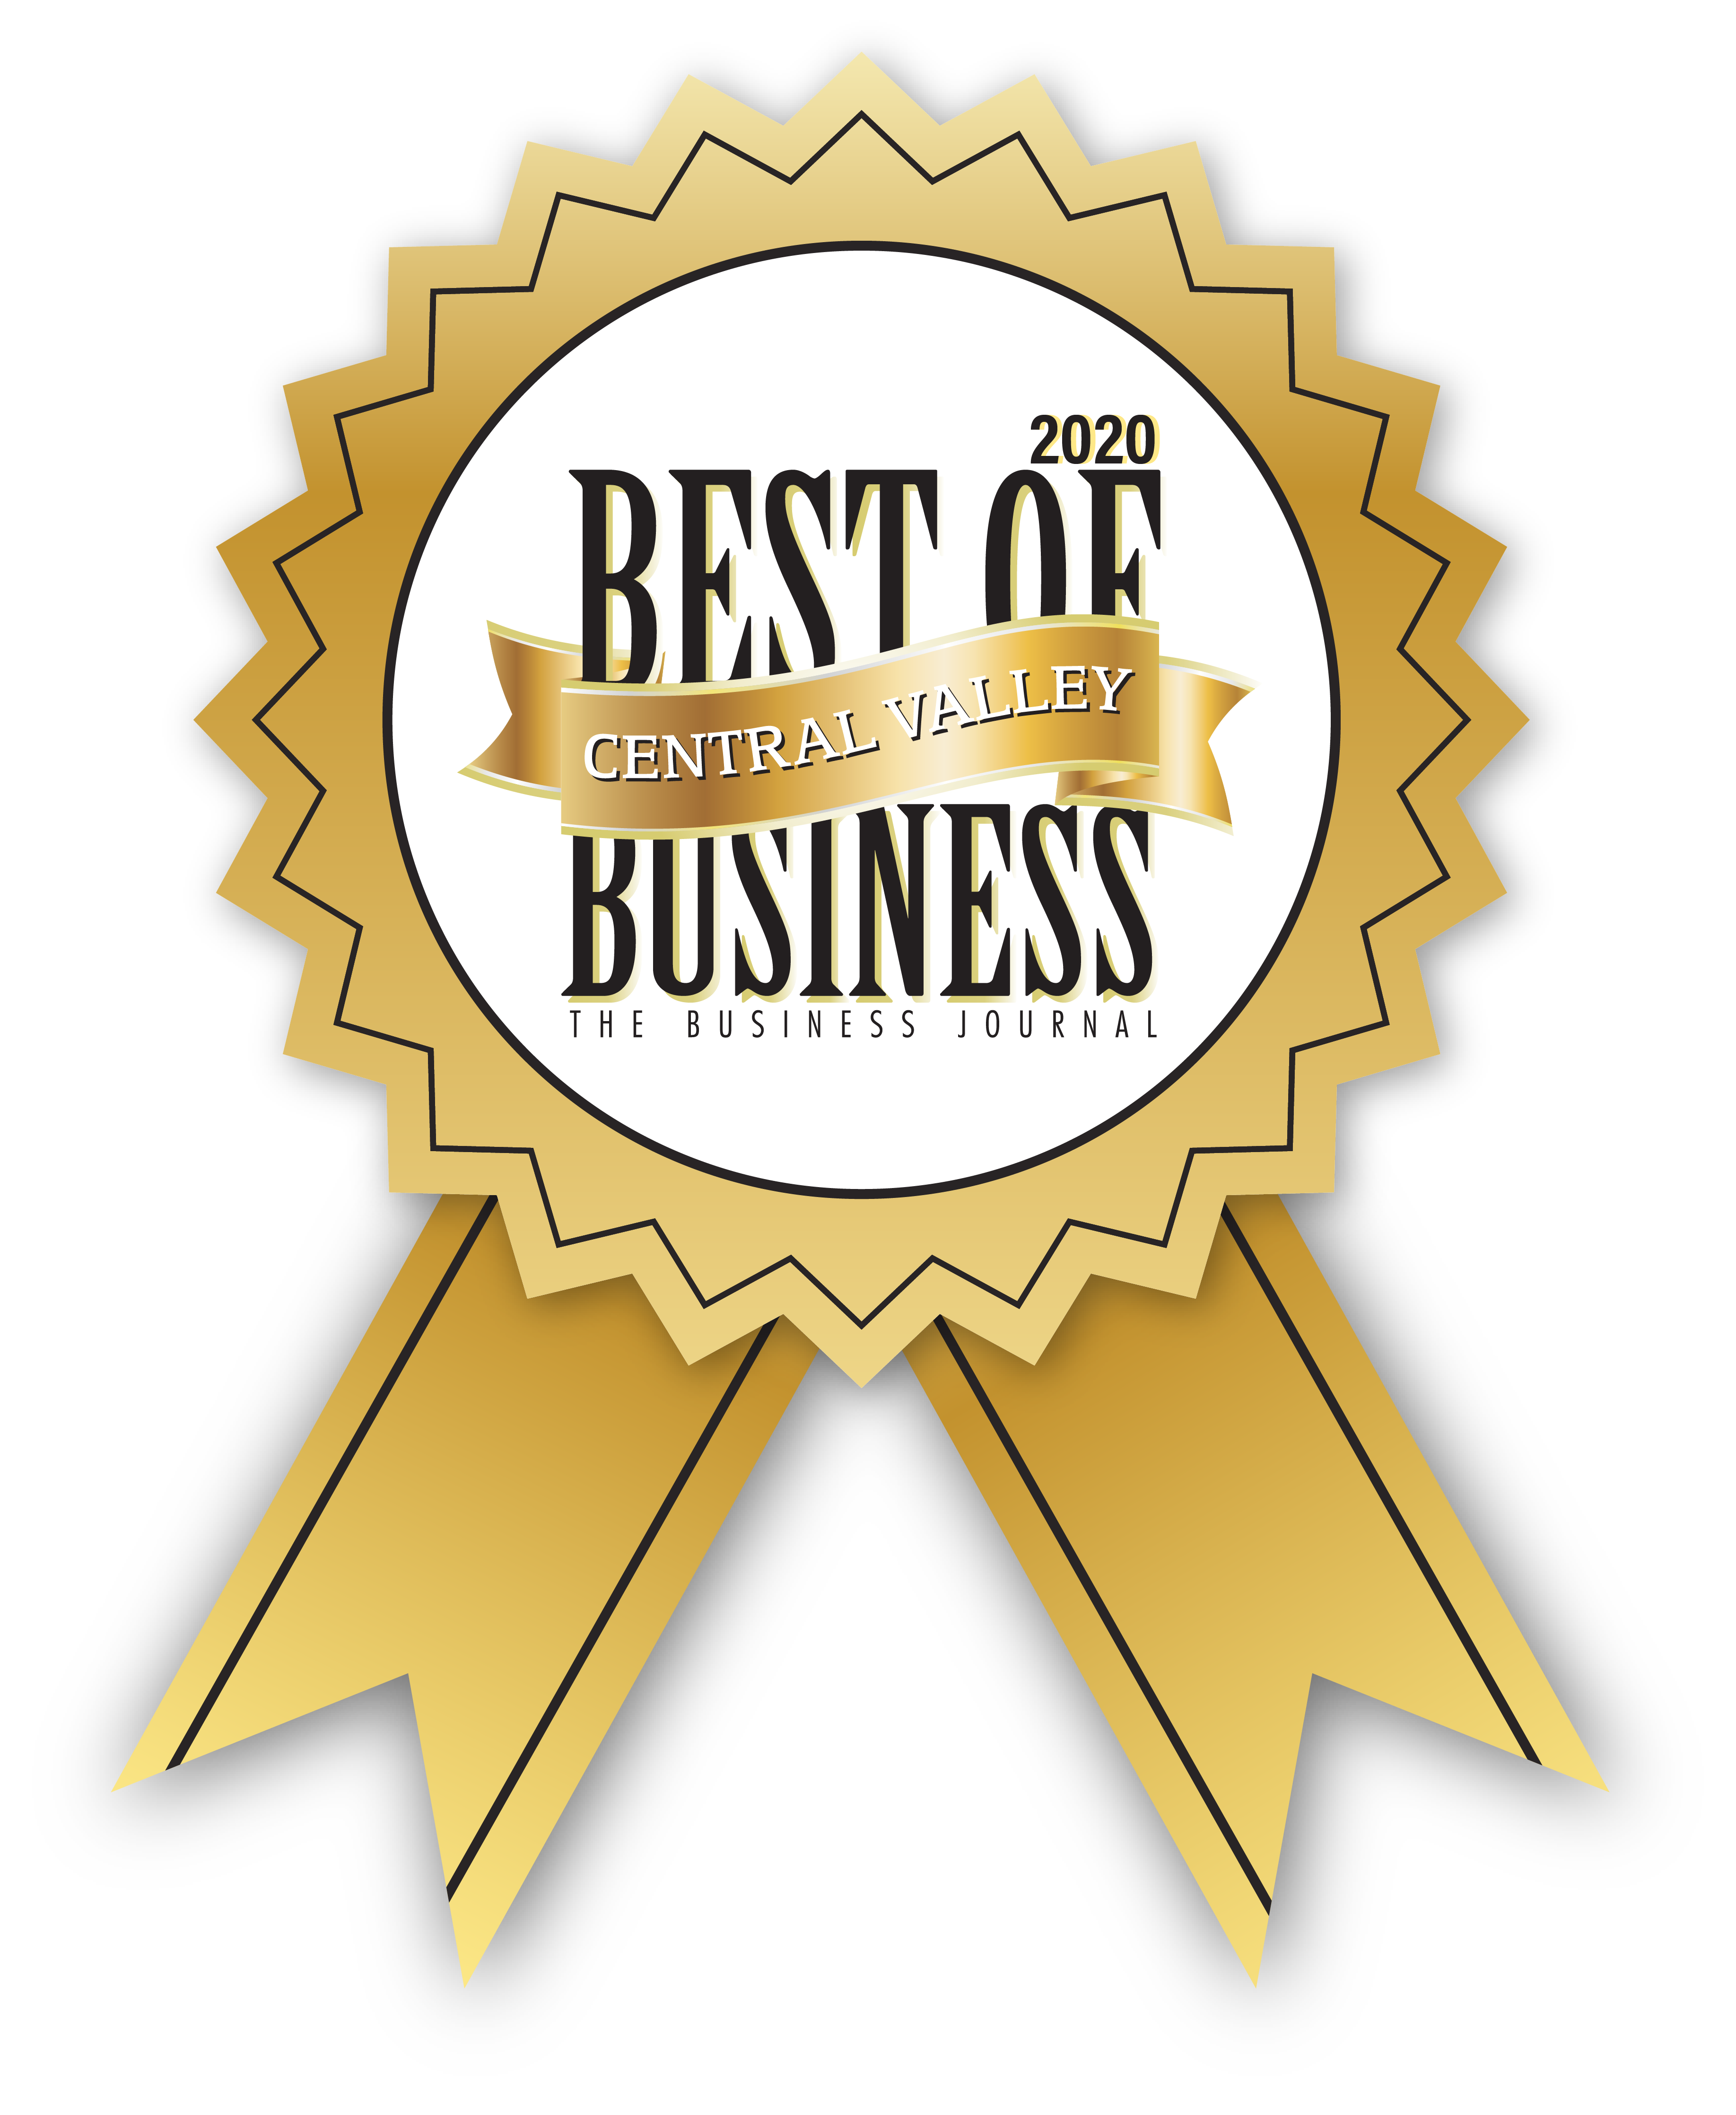 Best of Central Valley Business 2020 Award